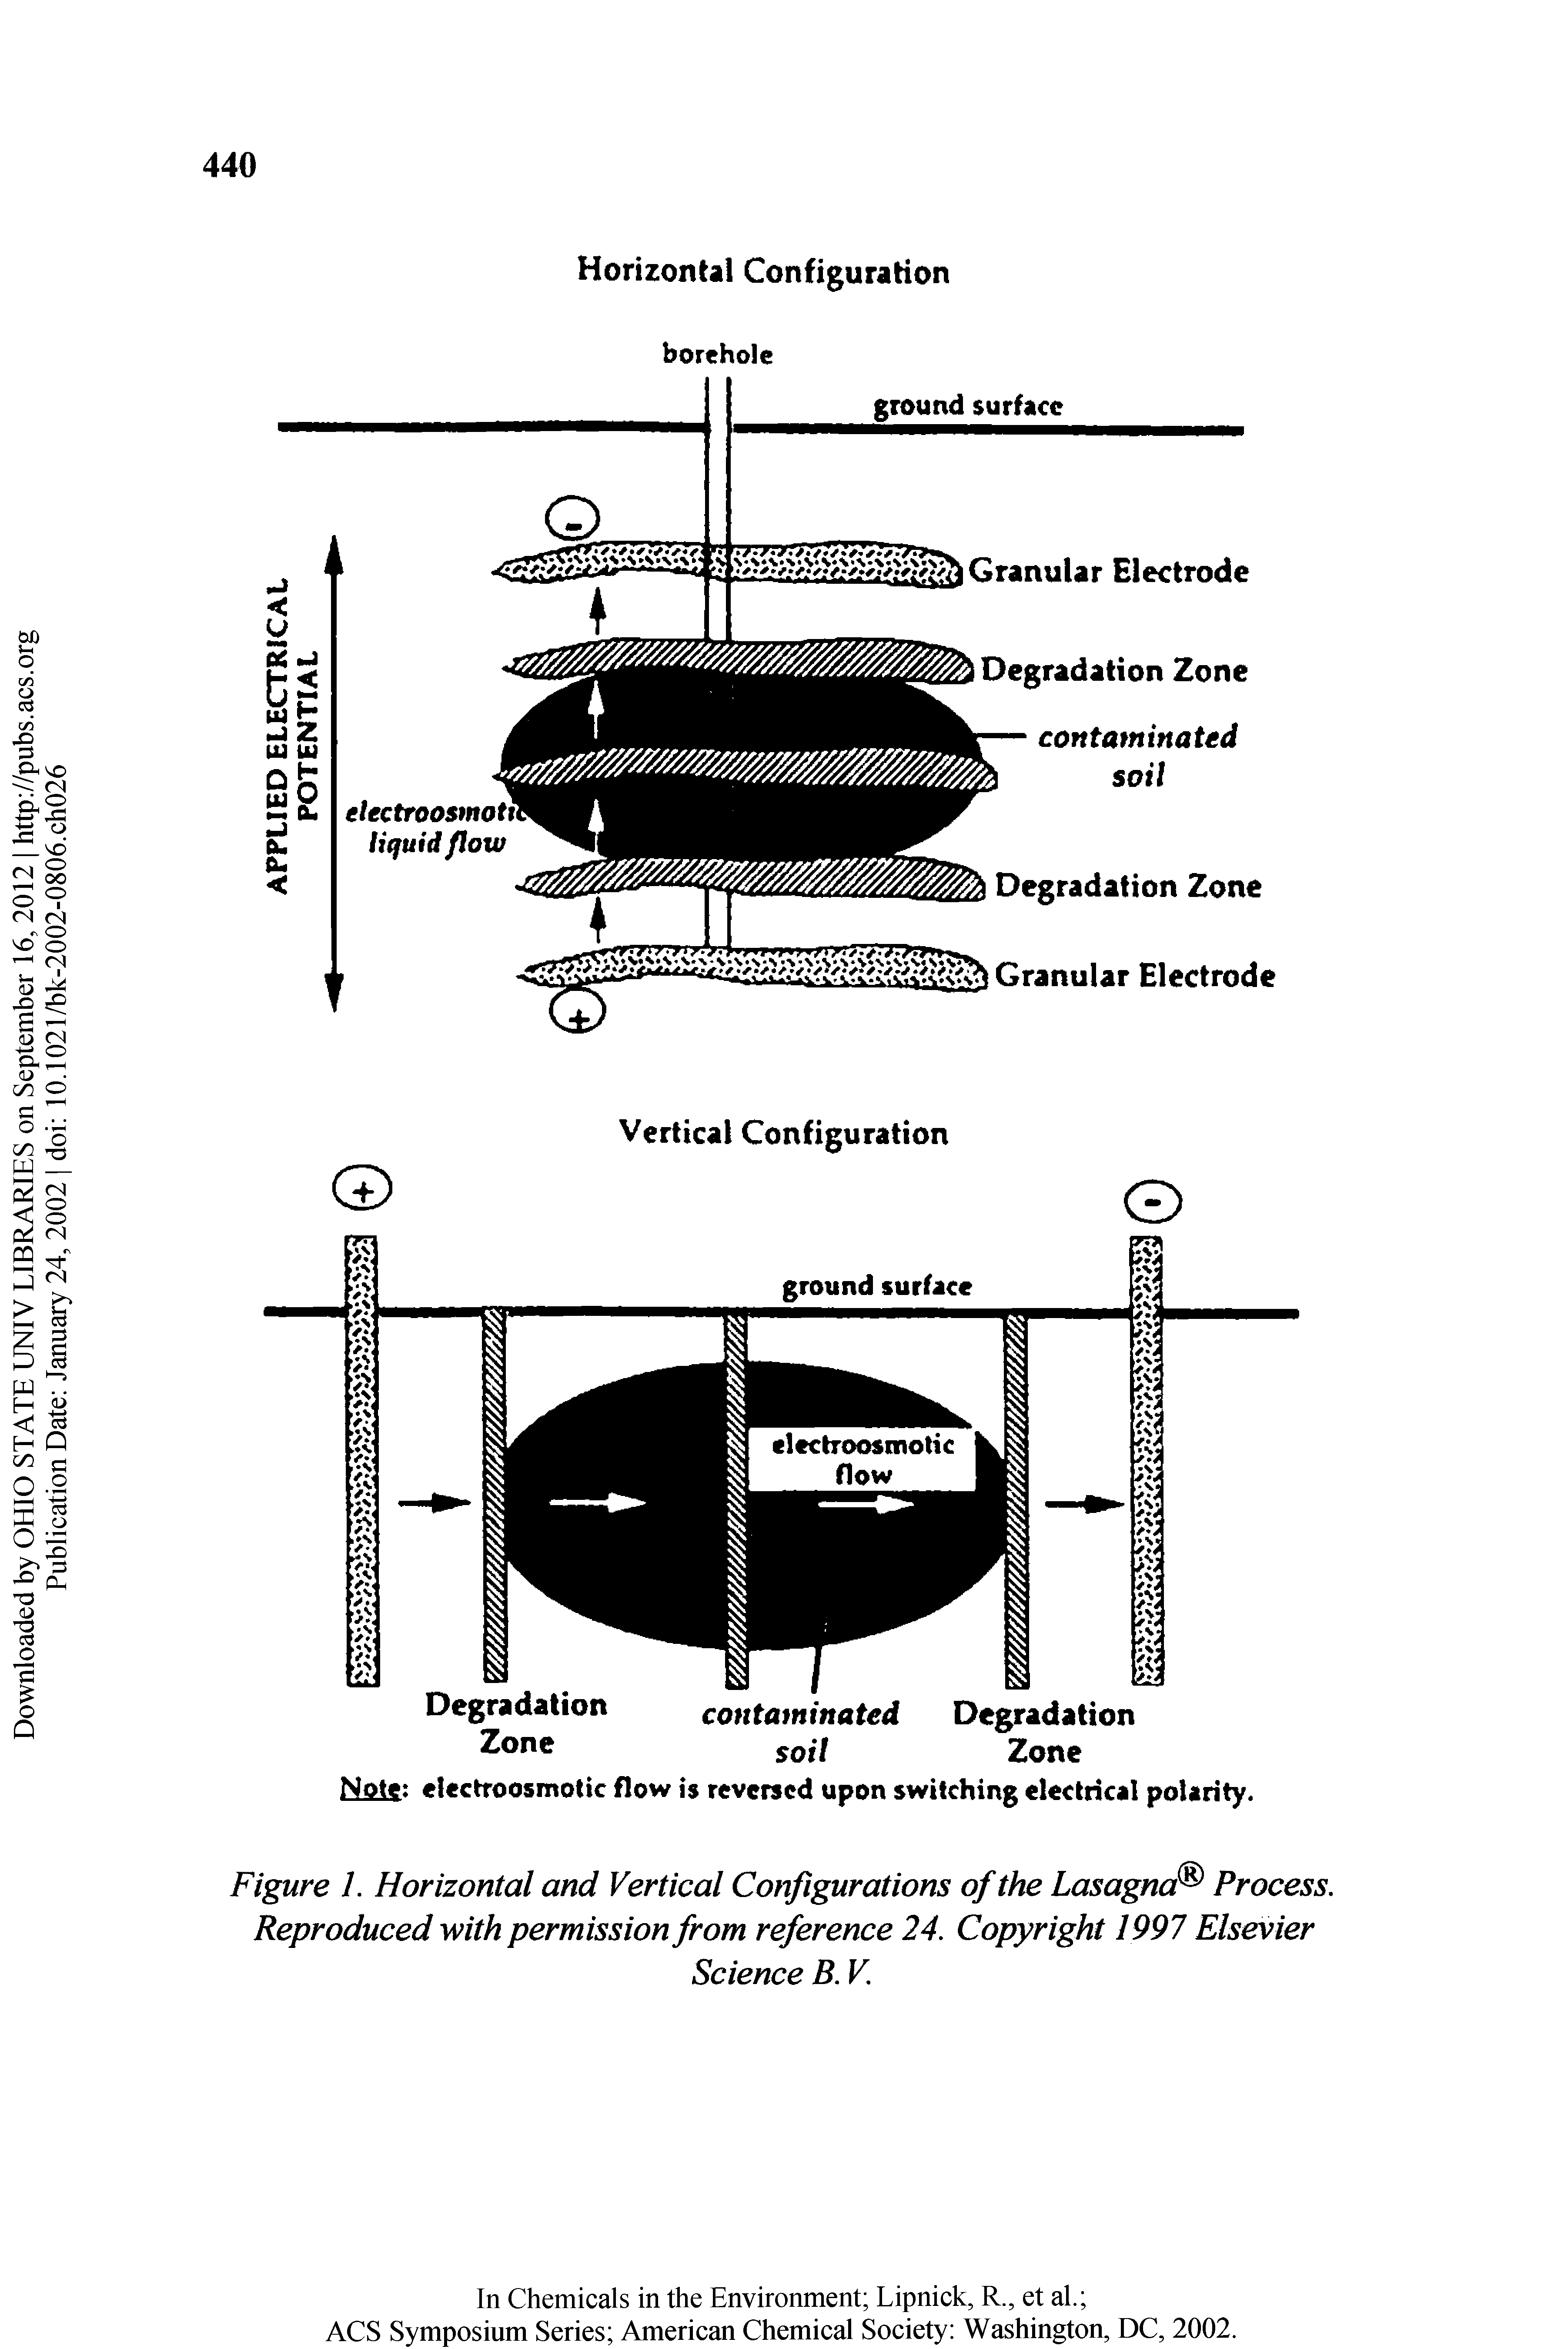 Figure 1. Horizontal and Vertical Configurations of the Lasagna Process, Reproduced with permission from reference 24. Copyright 1997 Elsevier...